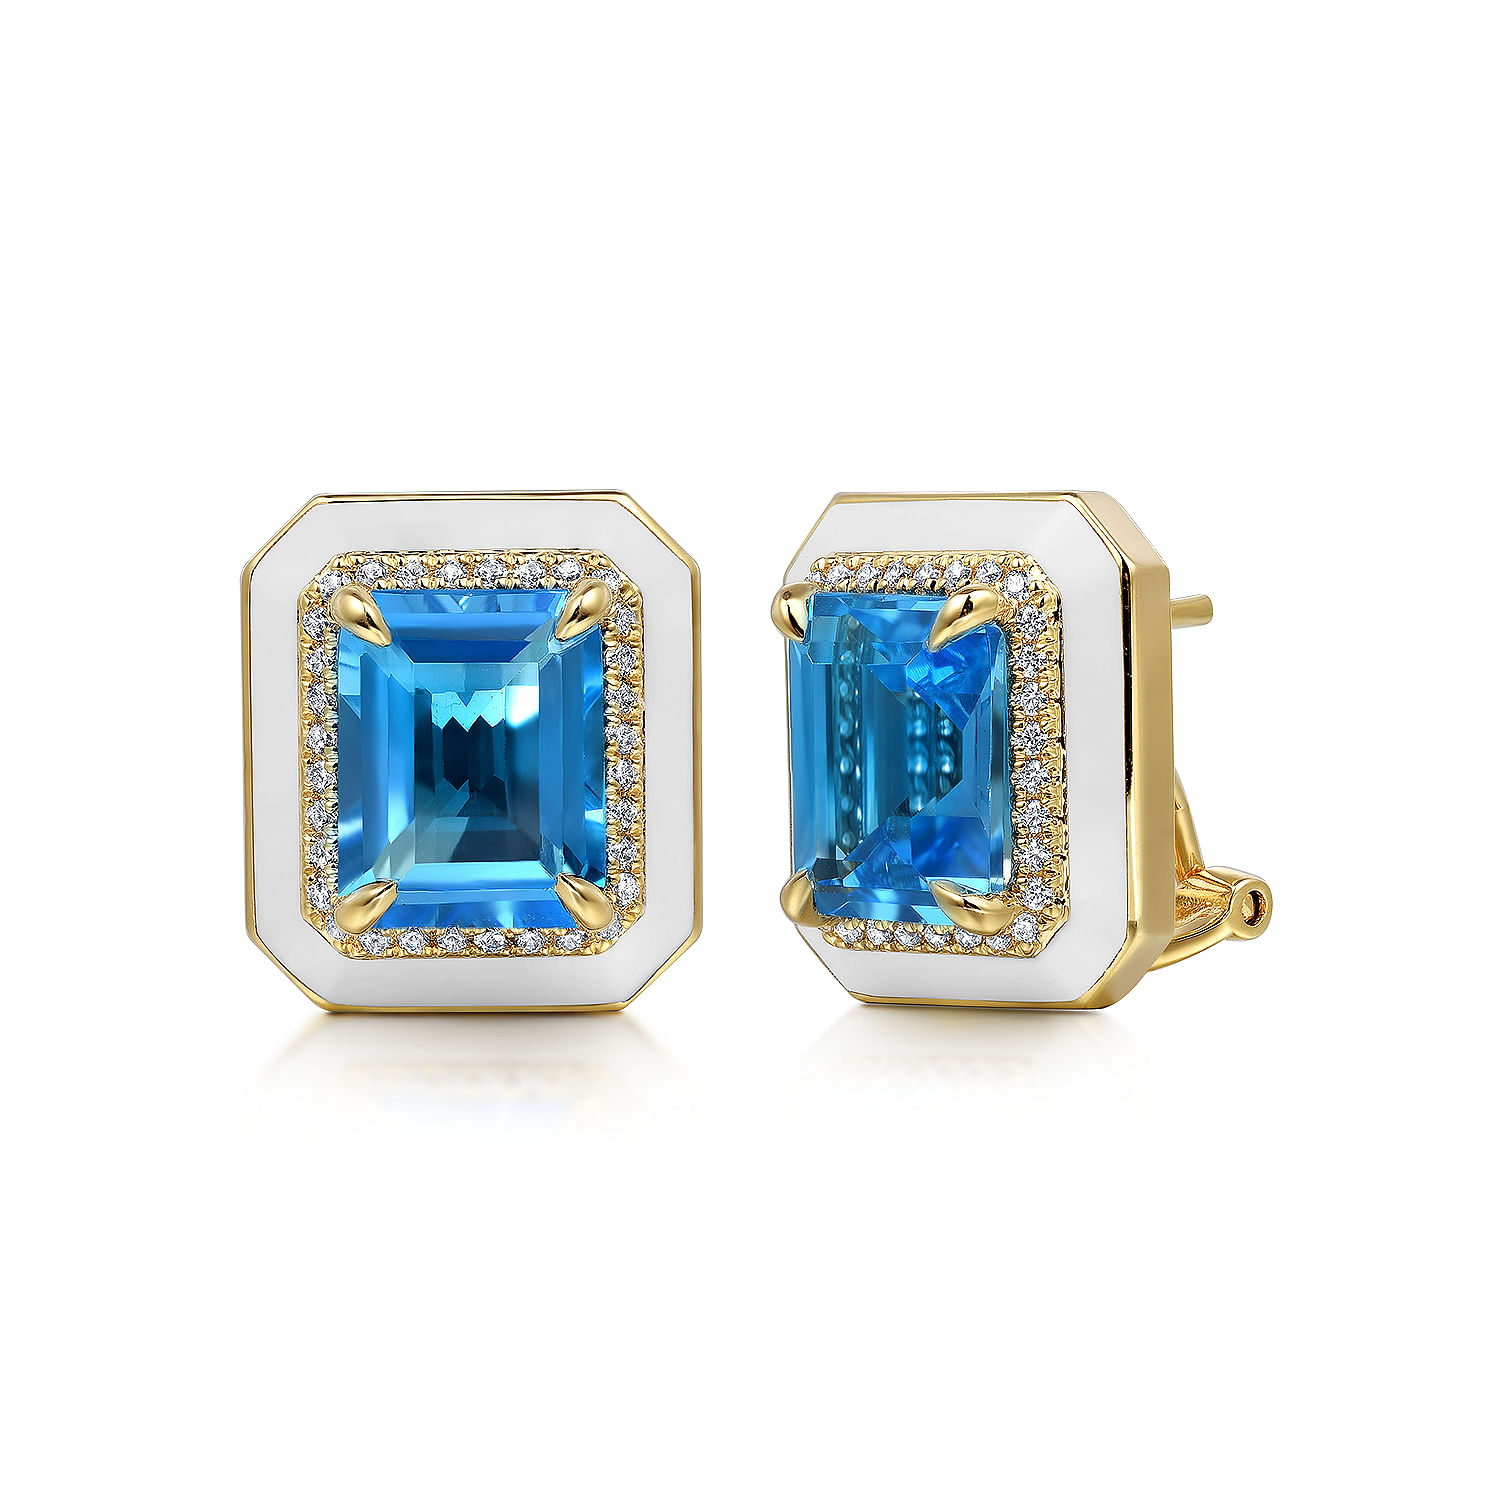 Gabriel - 14K Yellow Gold Diamond and Blue Topaz Emerald Cut Earrings With Flower Pattern J-Back and White Enamel